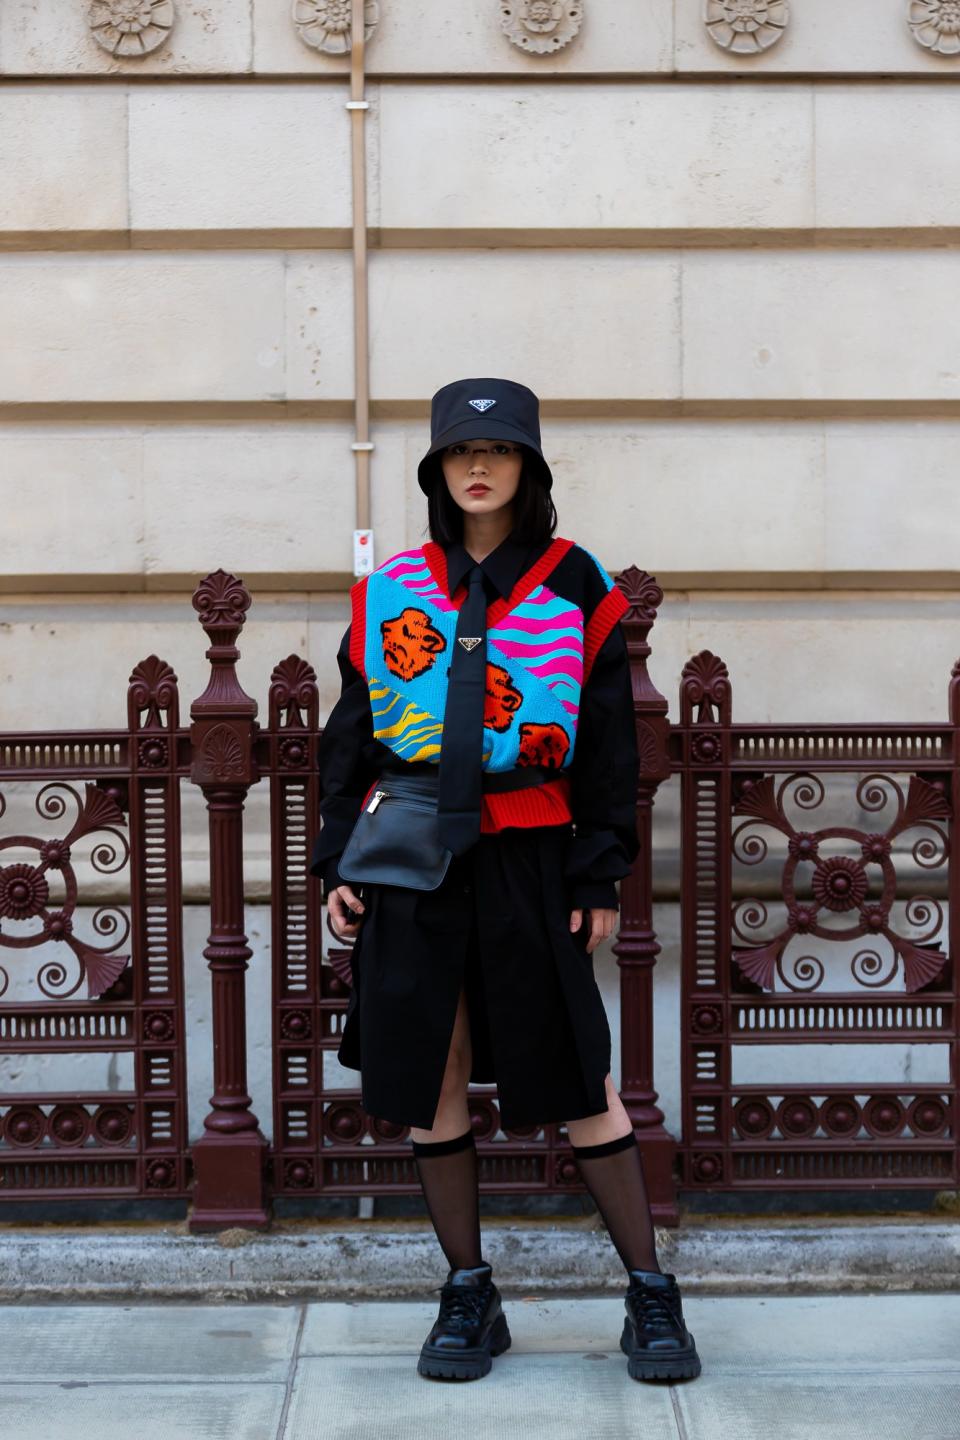 The Best Street Style at London Fashion Week 2019